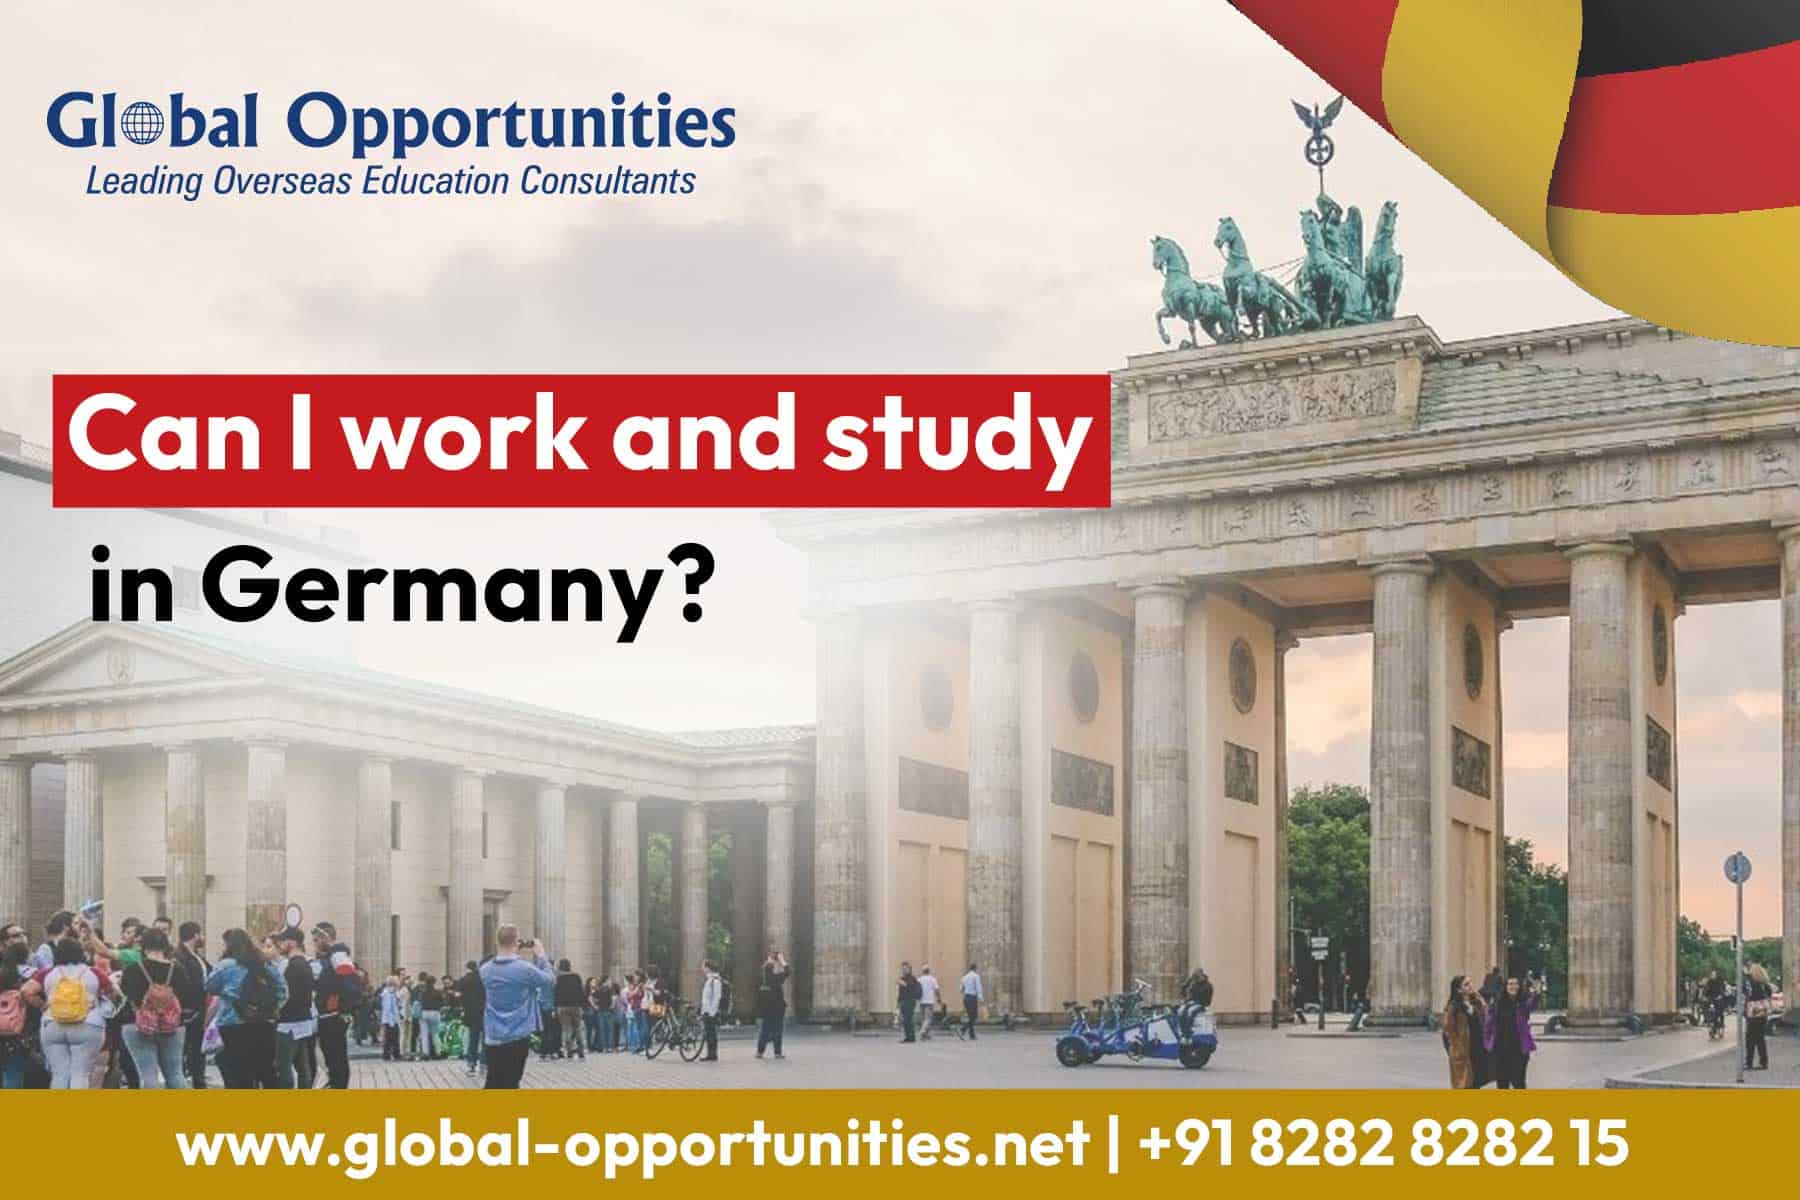 Can I work and study in Germany?